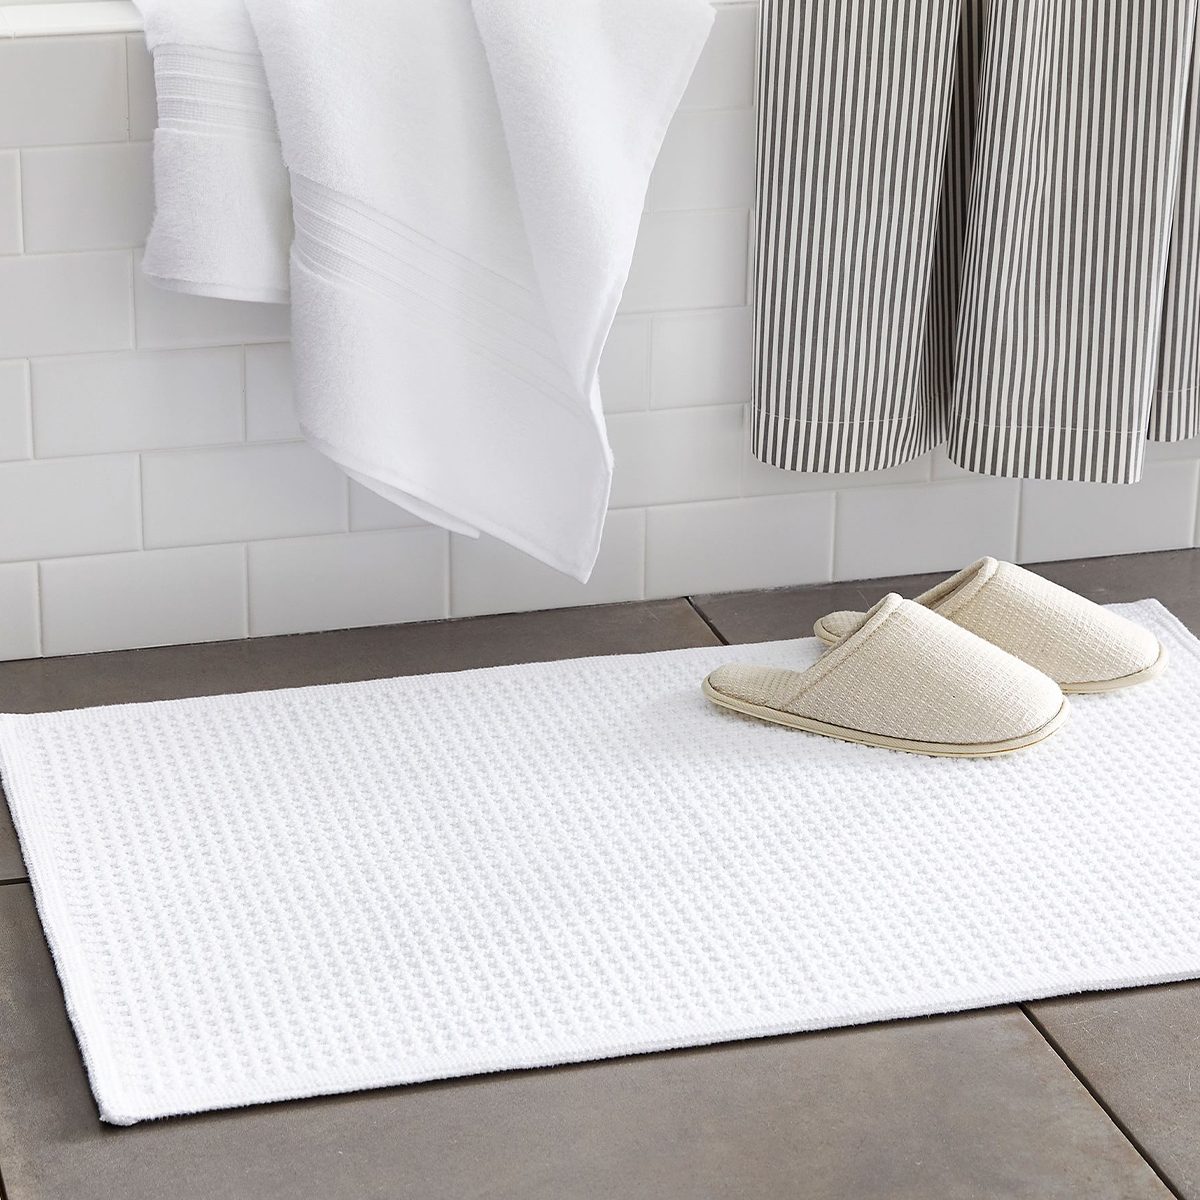 The 10 Best Bath Mats and Rugs  Stone, Cotton, Memory Foam, Bamboo